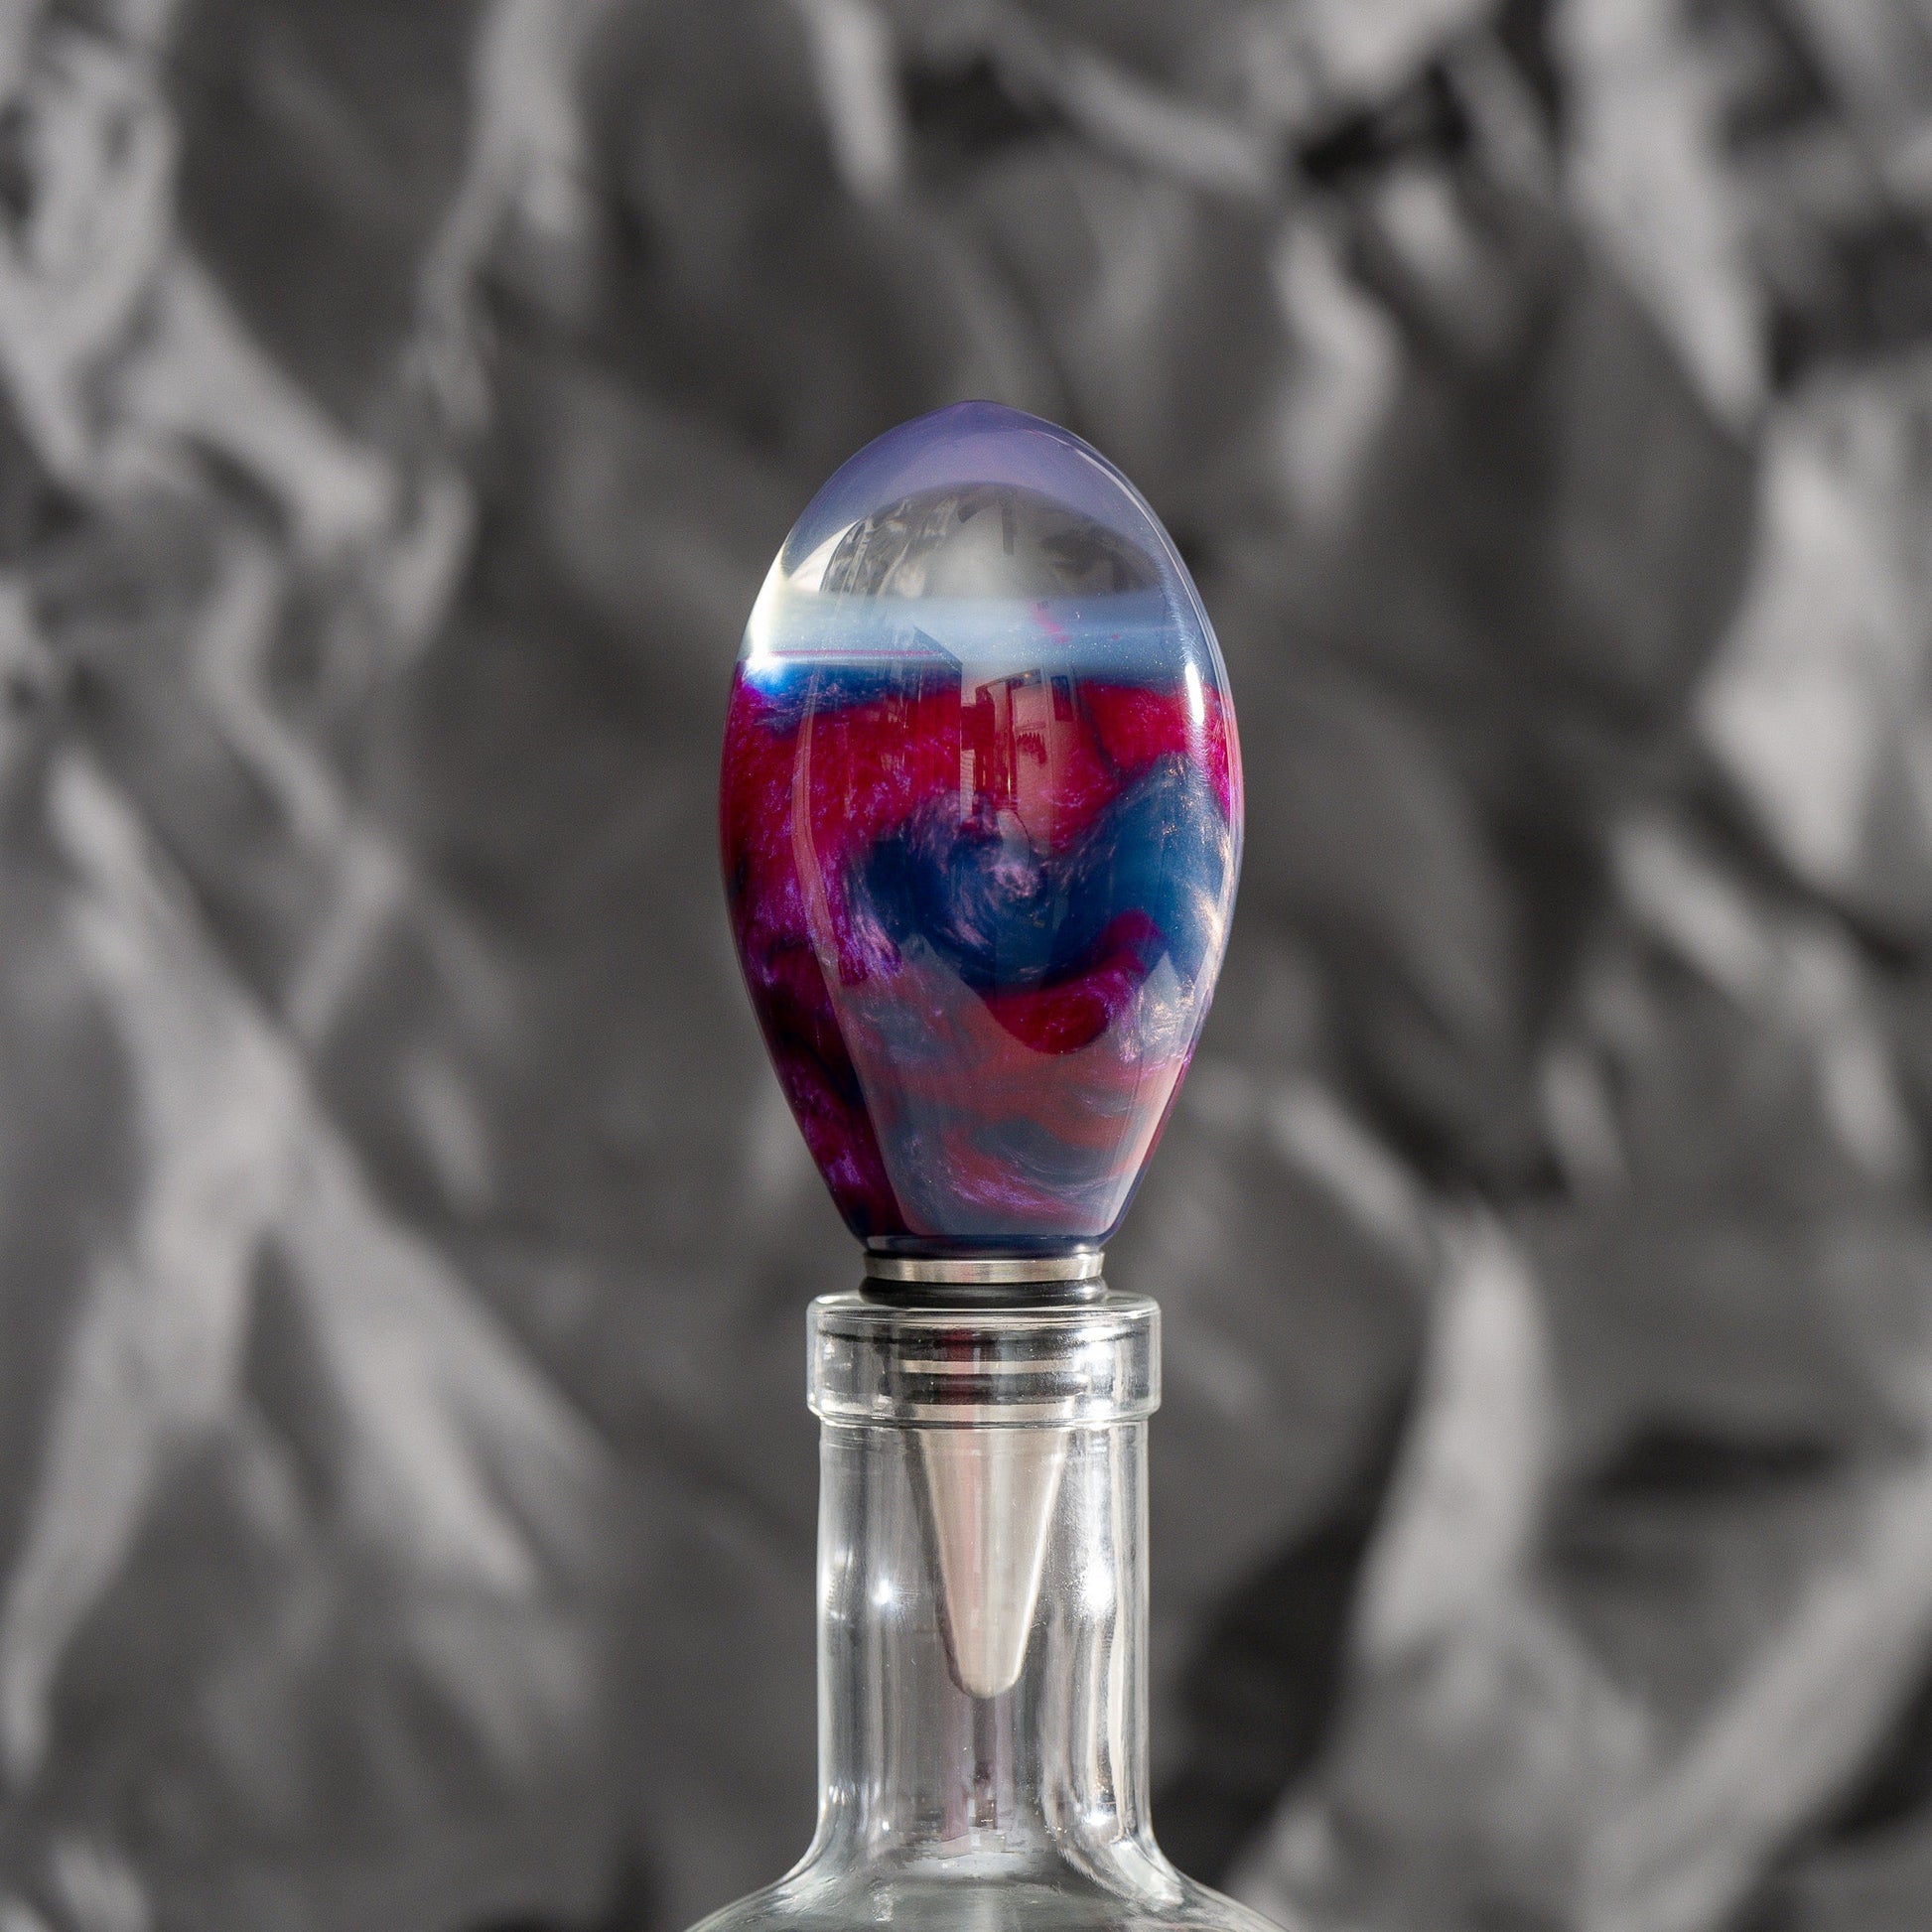 Handmade purple and red resin bottle stopper with a clear domed top, stainless steel dropper, and silicon gaskets